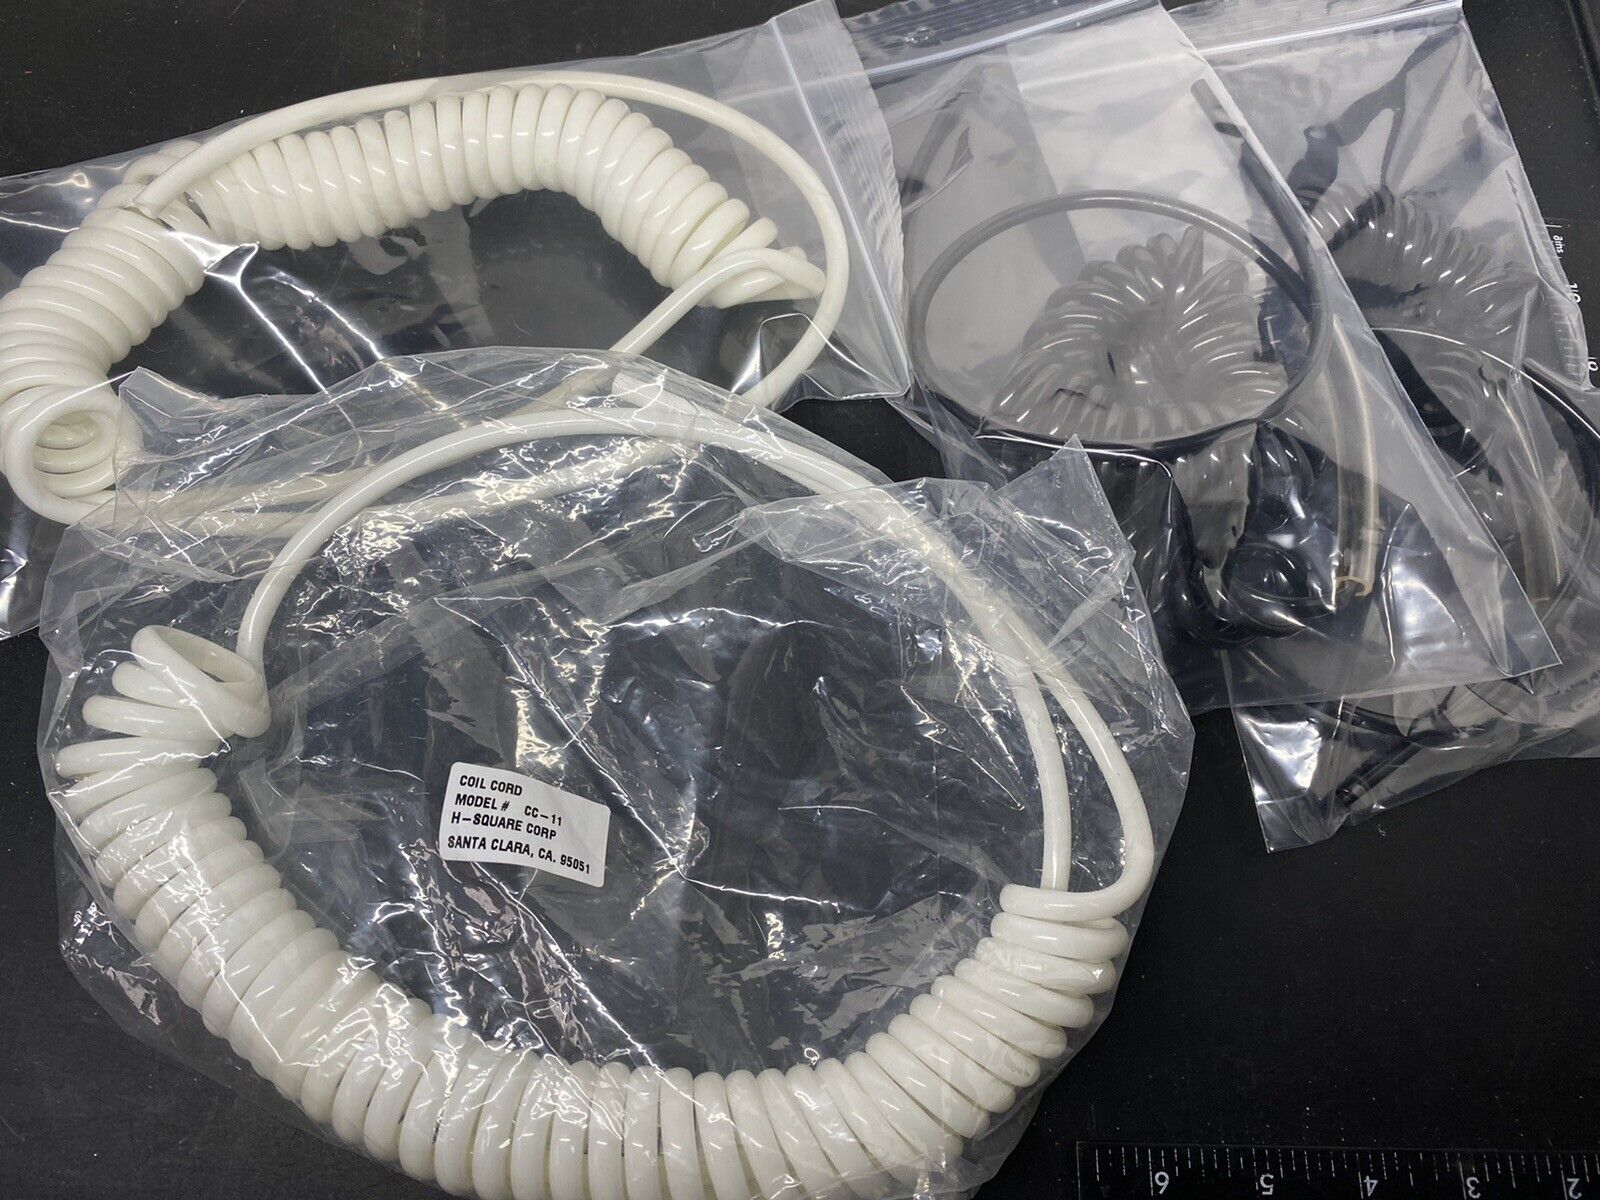 H-SQUARE ESD Coiled Vacuum Hose Lot CC-11 and more, Electronic Static Discharge